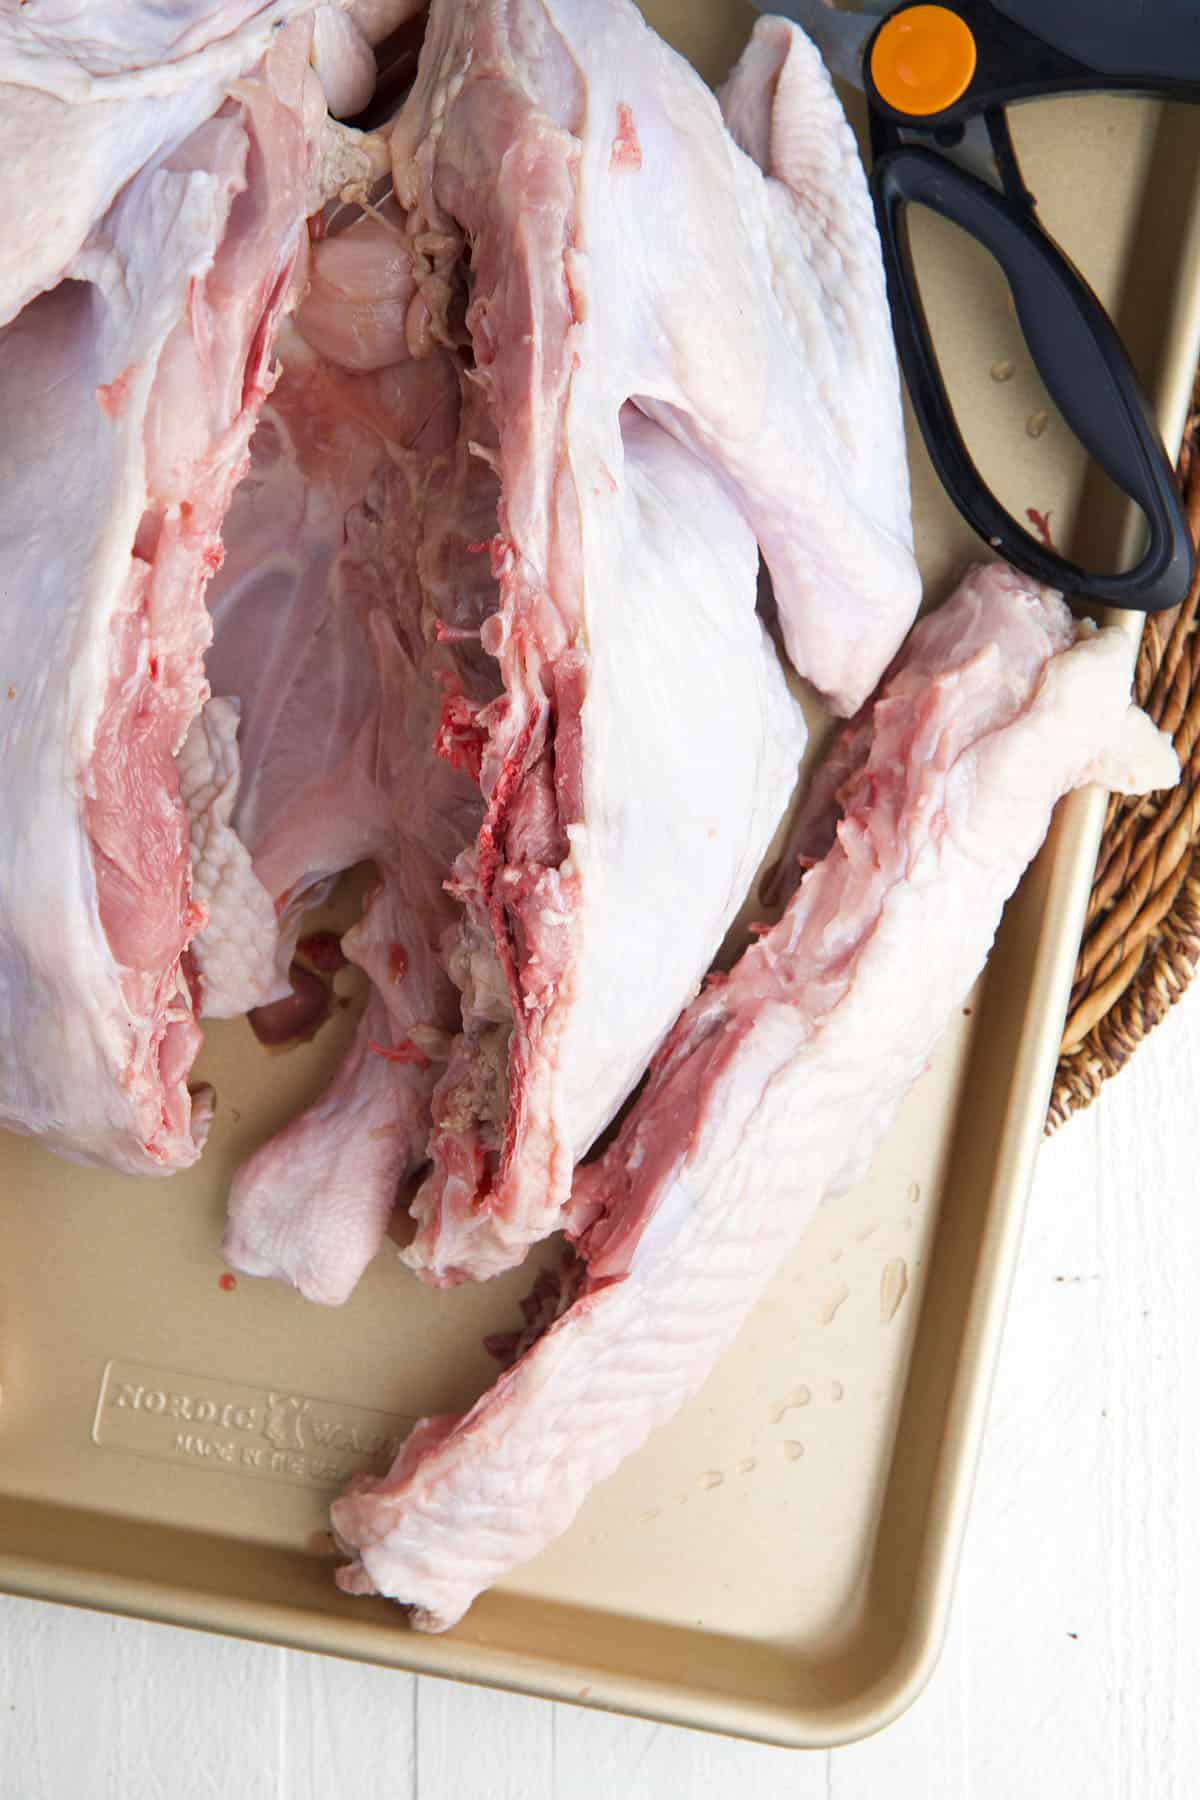 The backbone of a raw turkey has been removed. 